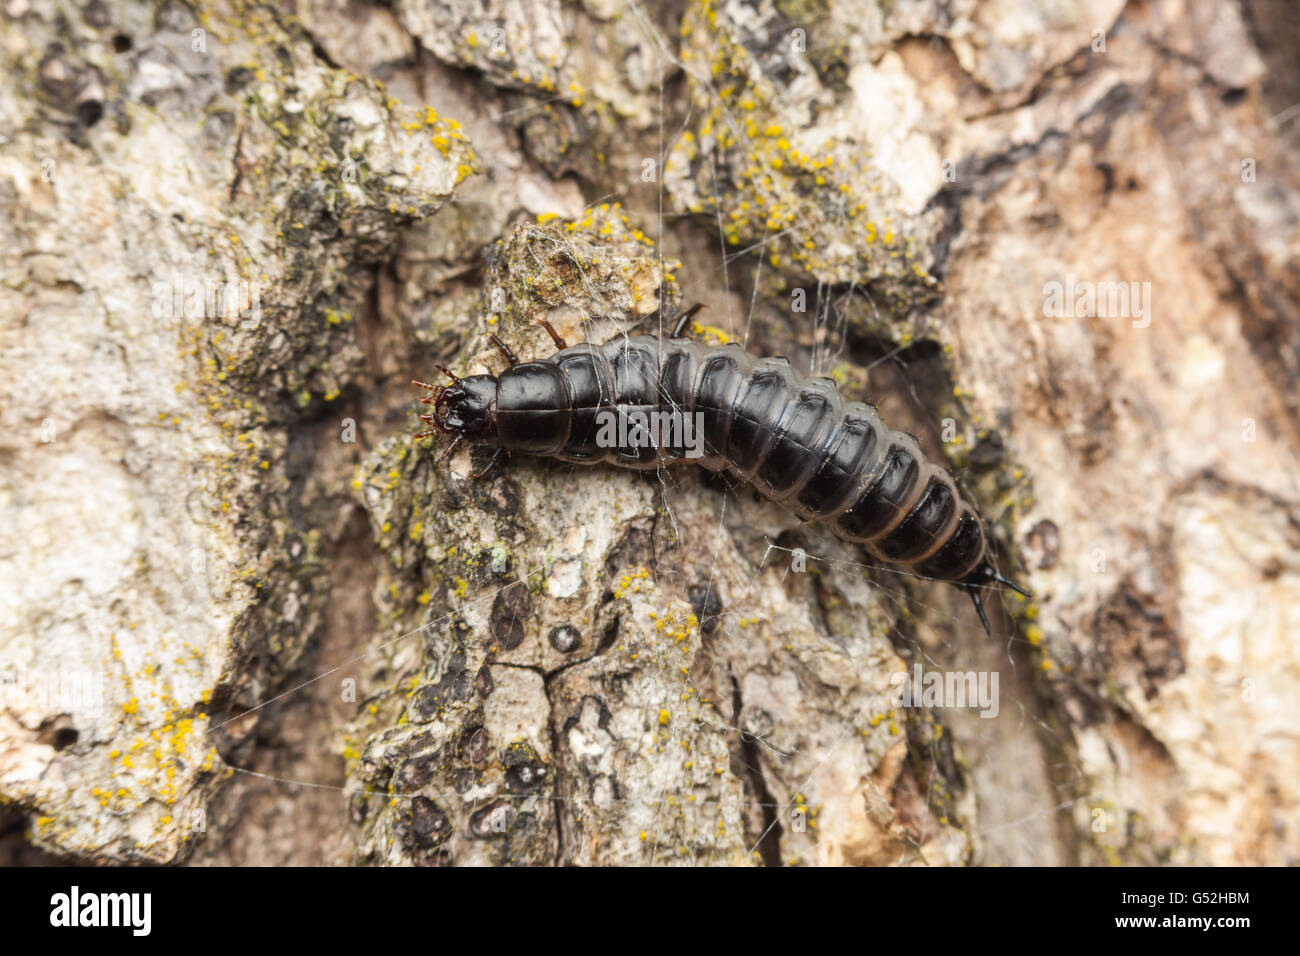 A Caterpillar Hunter (Calosoma sp.) ground beetle larva forages for food on the trunk of an oak tree. Stock Photo